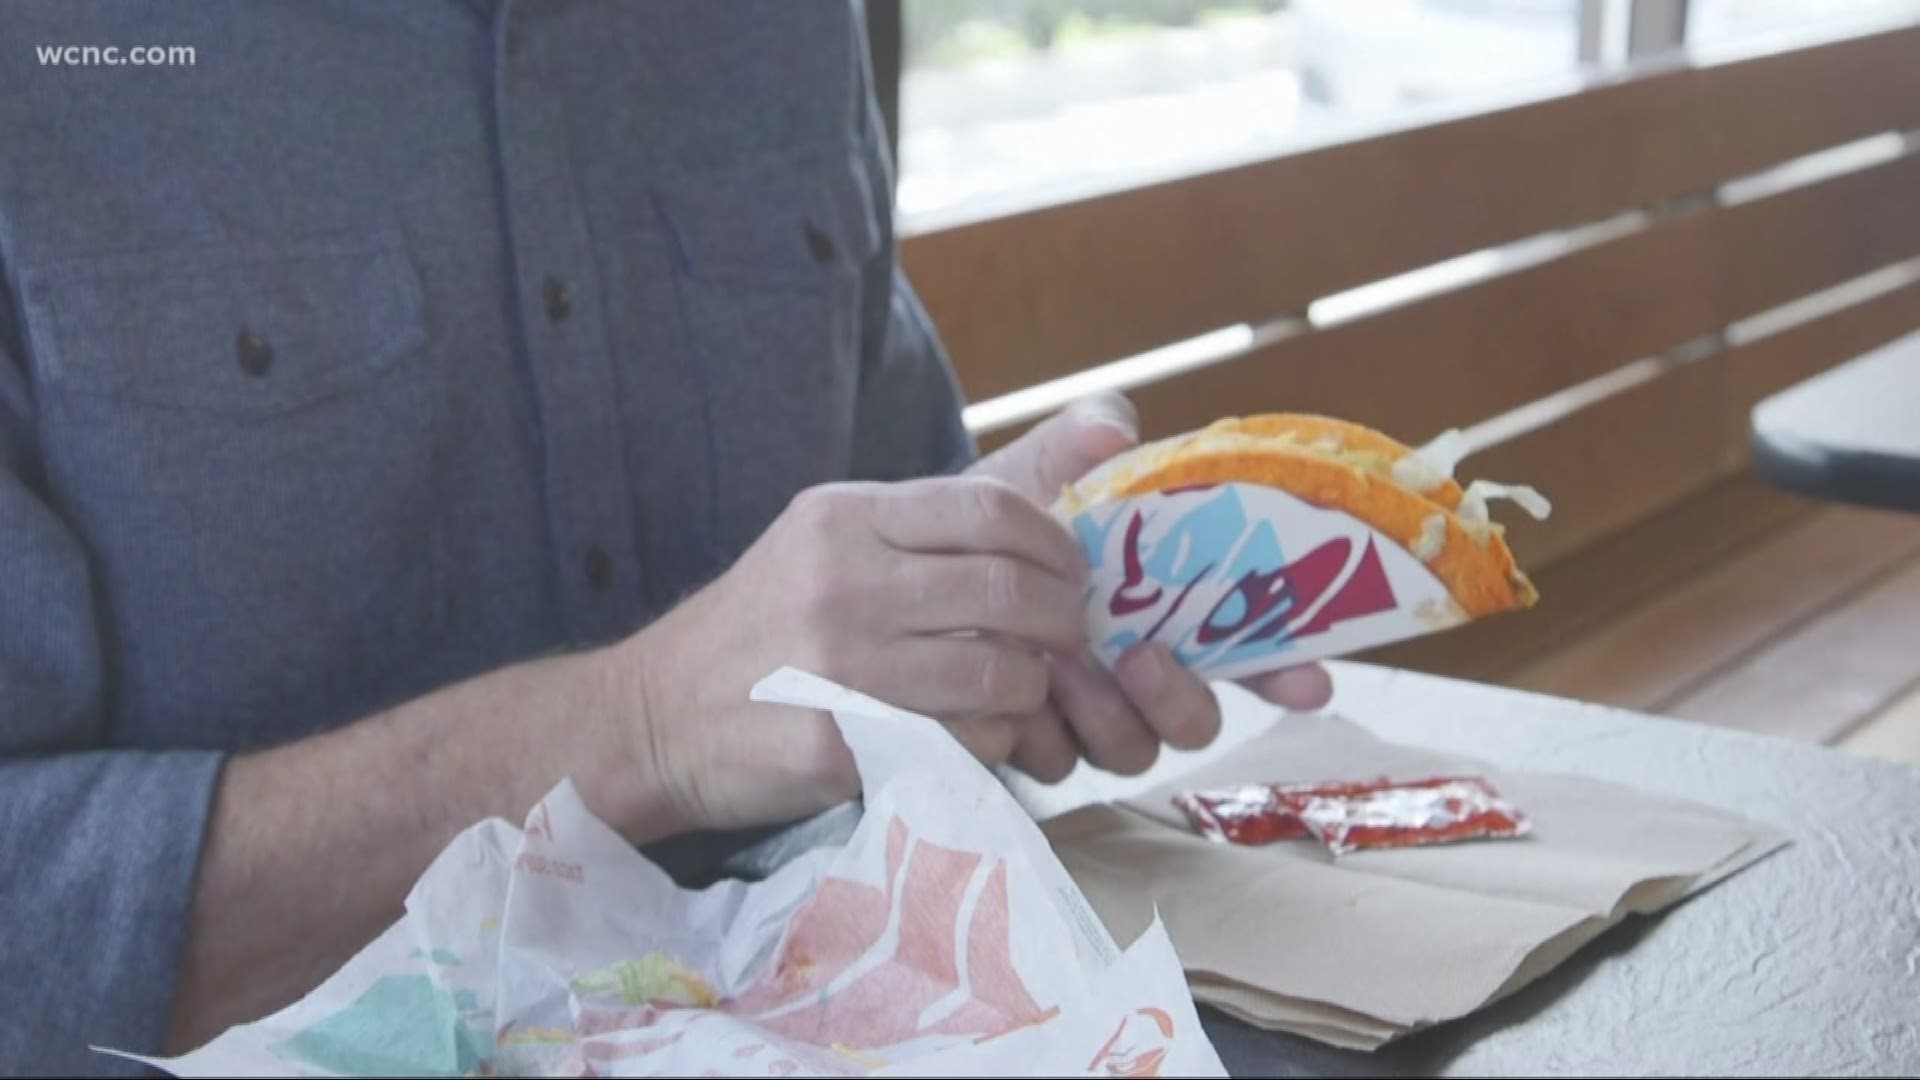 Taco Bell is giving away free Doritos Locos Tacos to everyone nationwide Tuesday thanks to the Golden State Warriors' win over the Toronto Raptors in Game 2 of the NBA Finals.